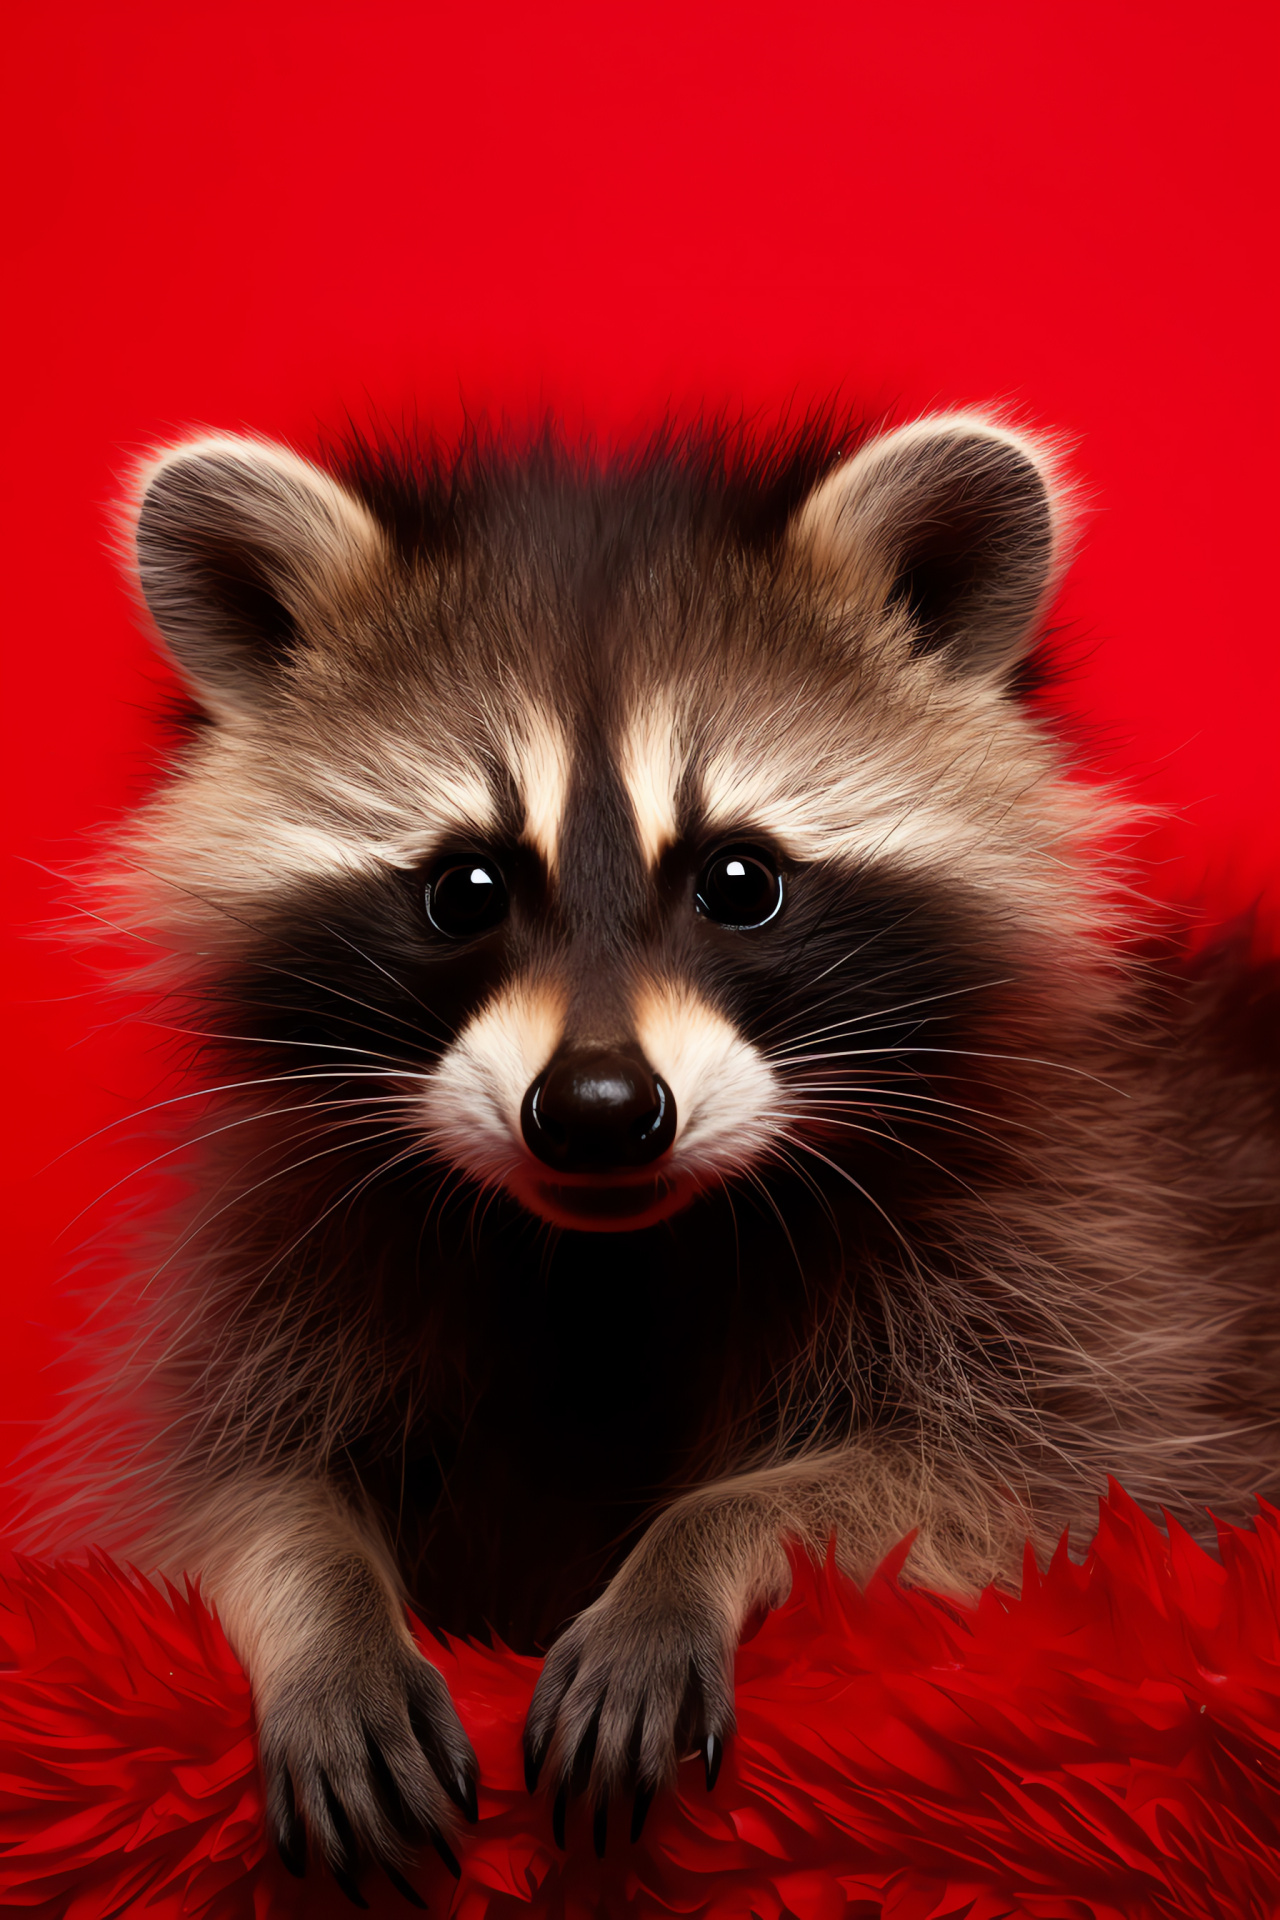 Procyonid cub, downy pelt texture, youthful bandit, sly grin, crimson backdrop, HD Phone Wallpaper